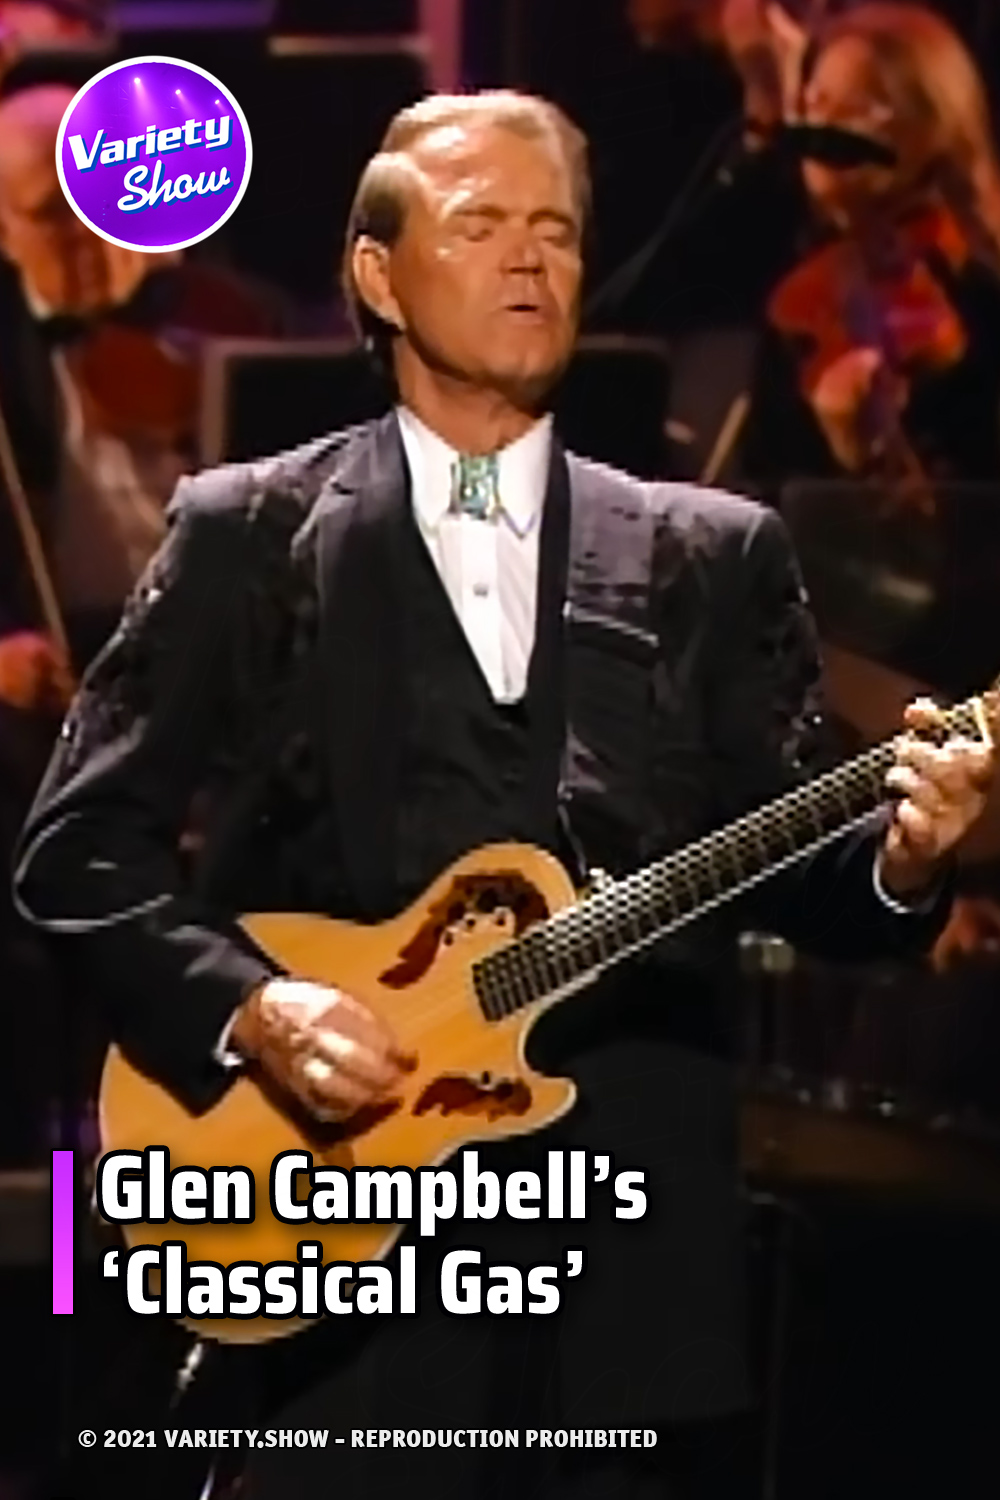 Glen Campbell’s ‘Classical Gas’